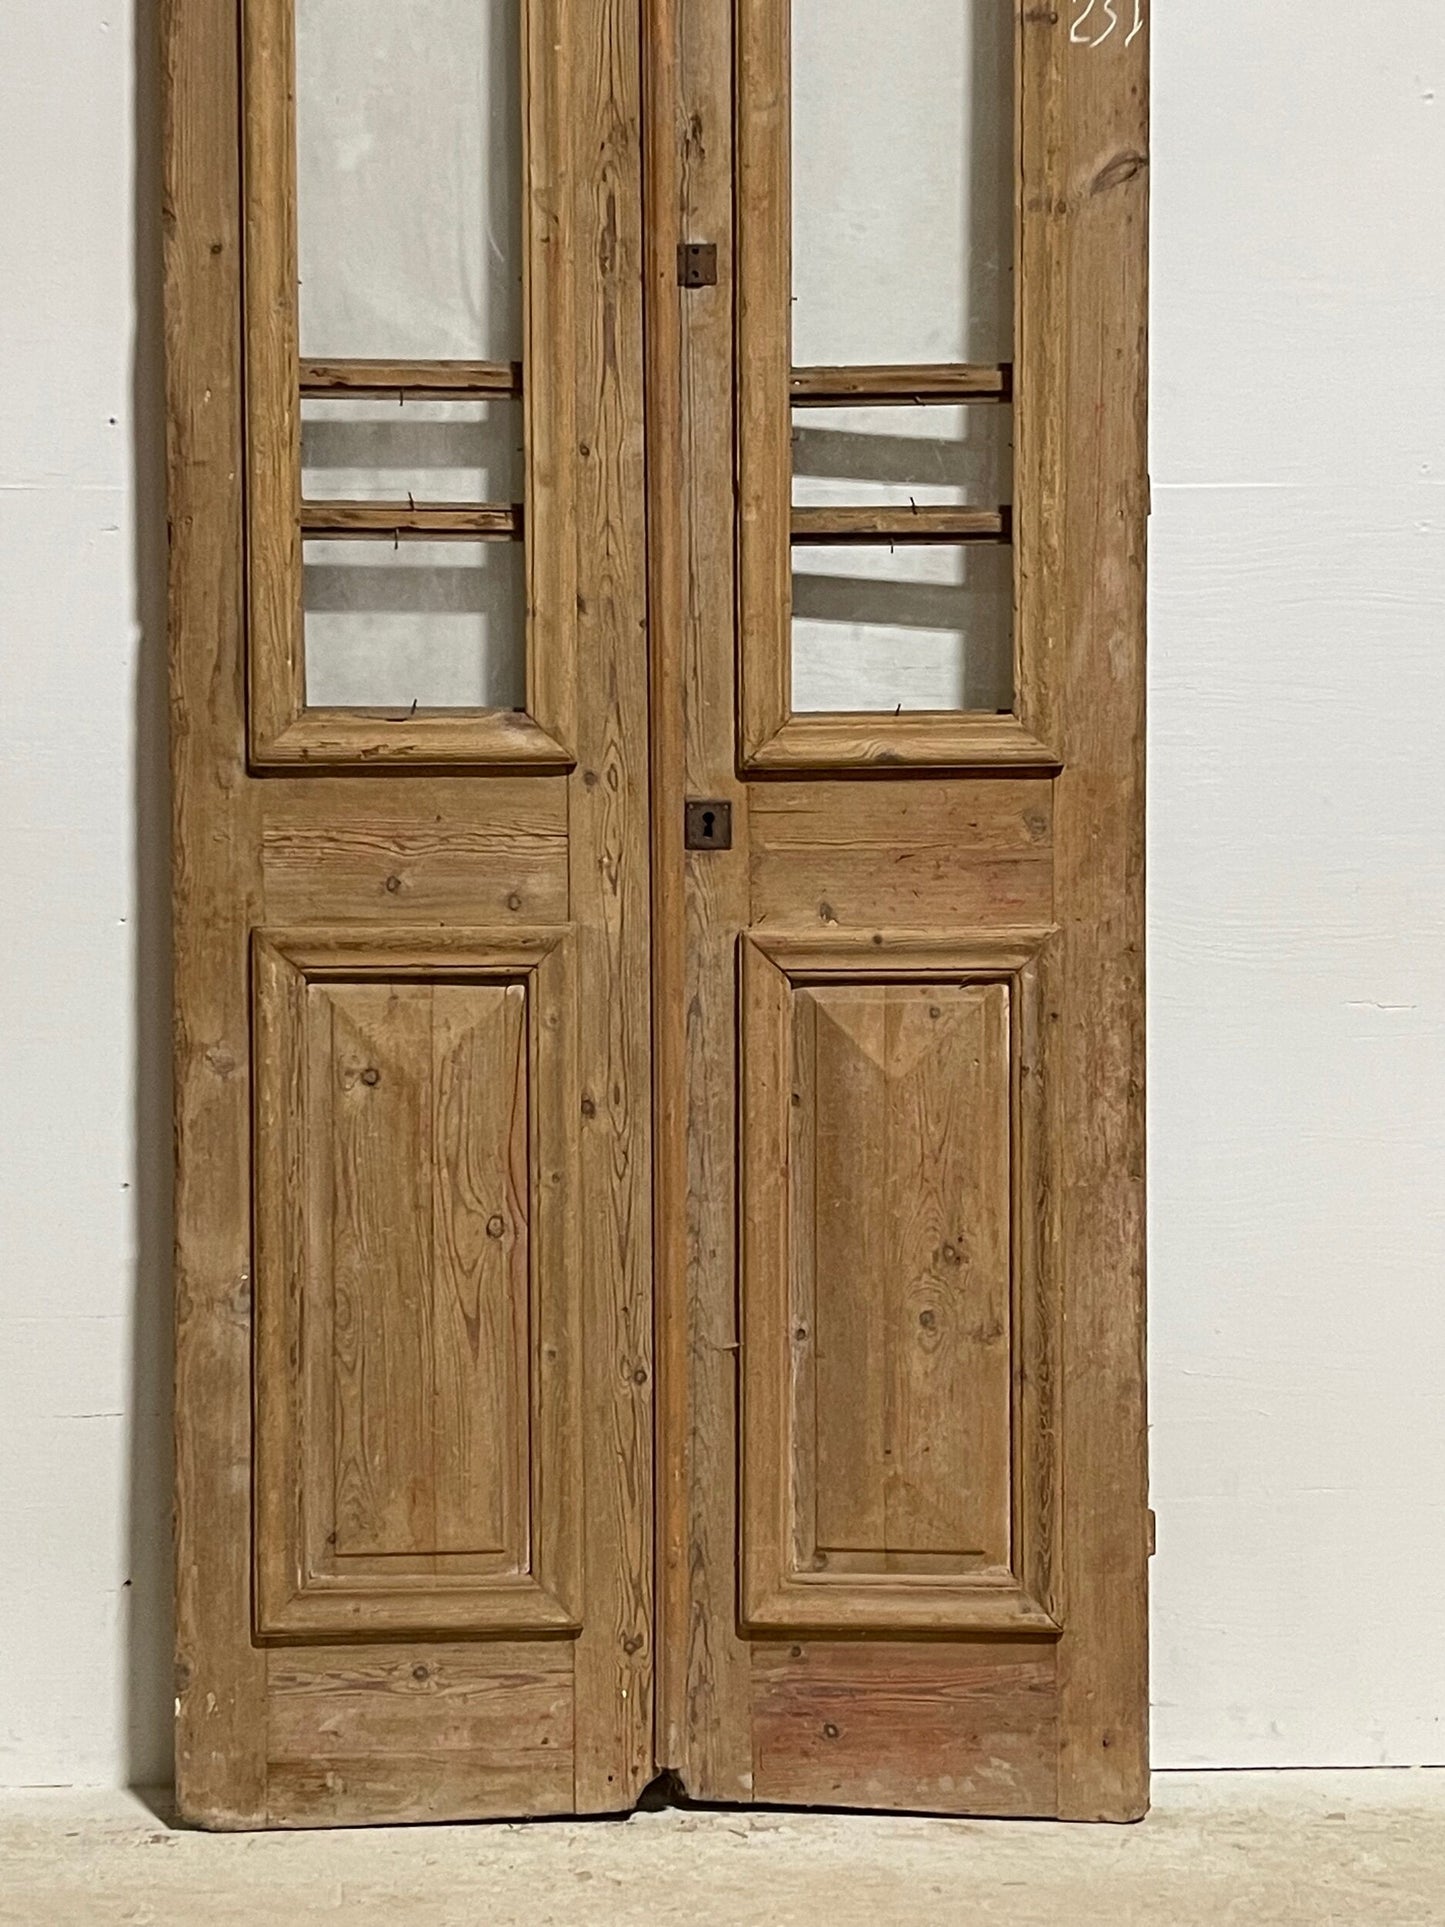 Antique French doors with glass (91.5x35) H0101s